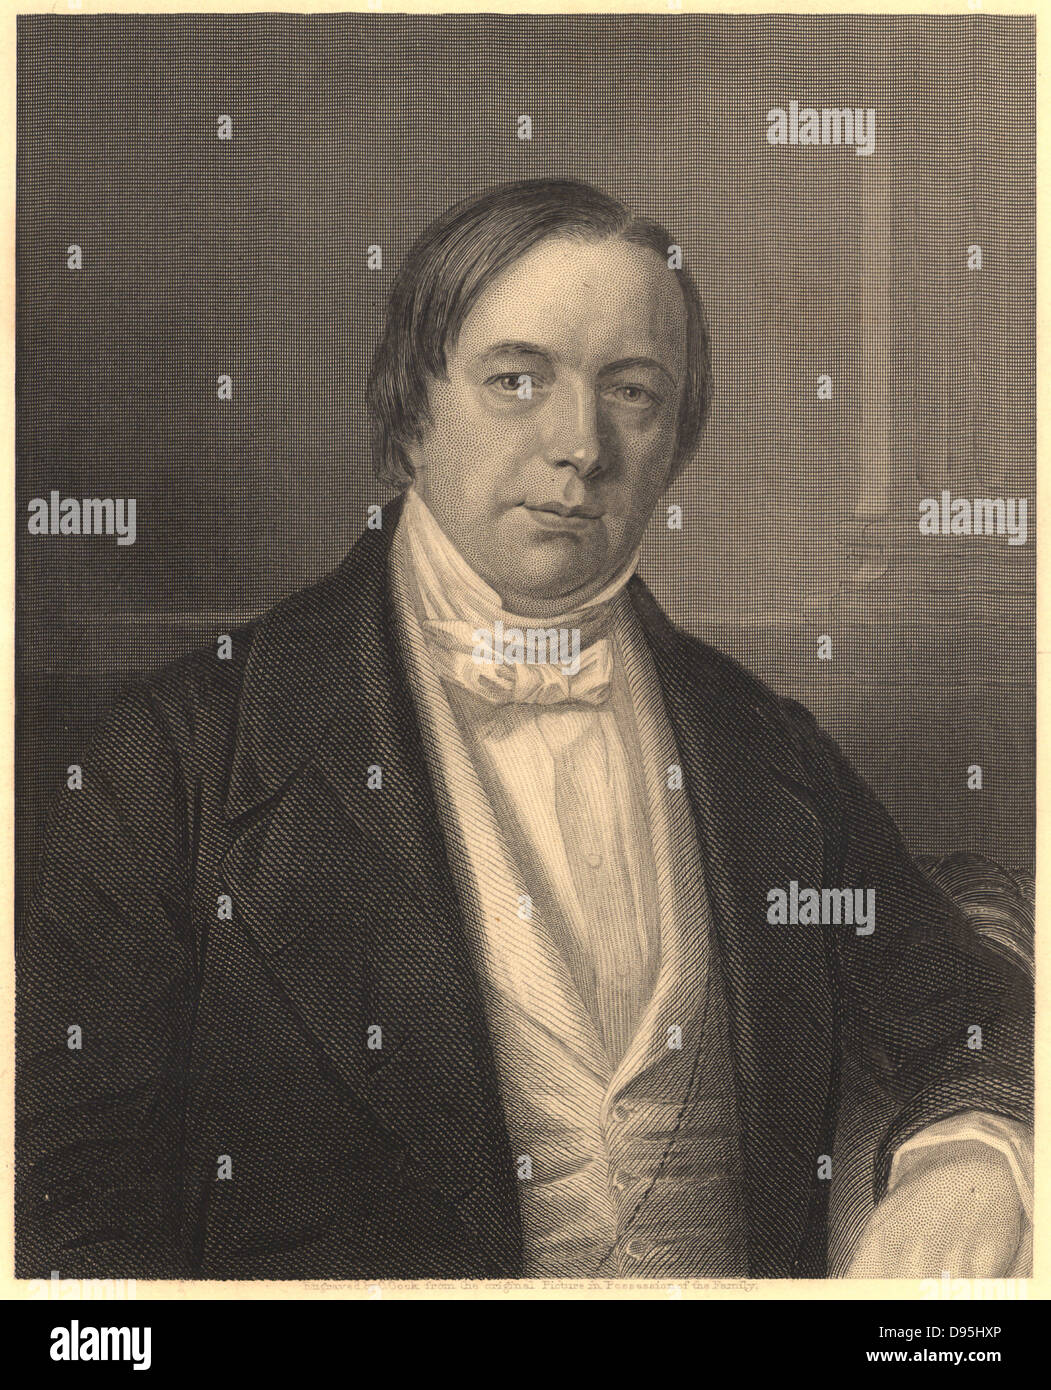 William Gregory (1803-1858), Scottish chemist. Professor of medicine and chemistry at King's College, Aberdeen, and from 1843 Professor of chemistry at Edinburgh university. Studied under Justus von Liebig at Giessen, Germany, and edited English editions of Liebig's works.   From James Sheridan Muspratt 'Chemistry' (London, c1860). Engraving. Stock Photo